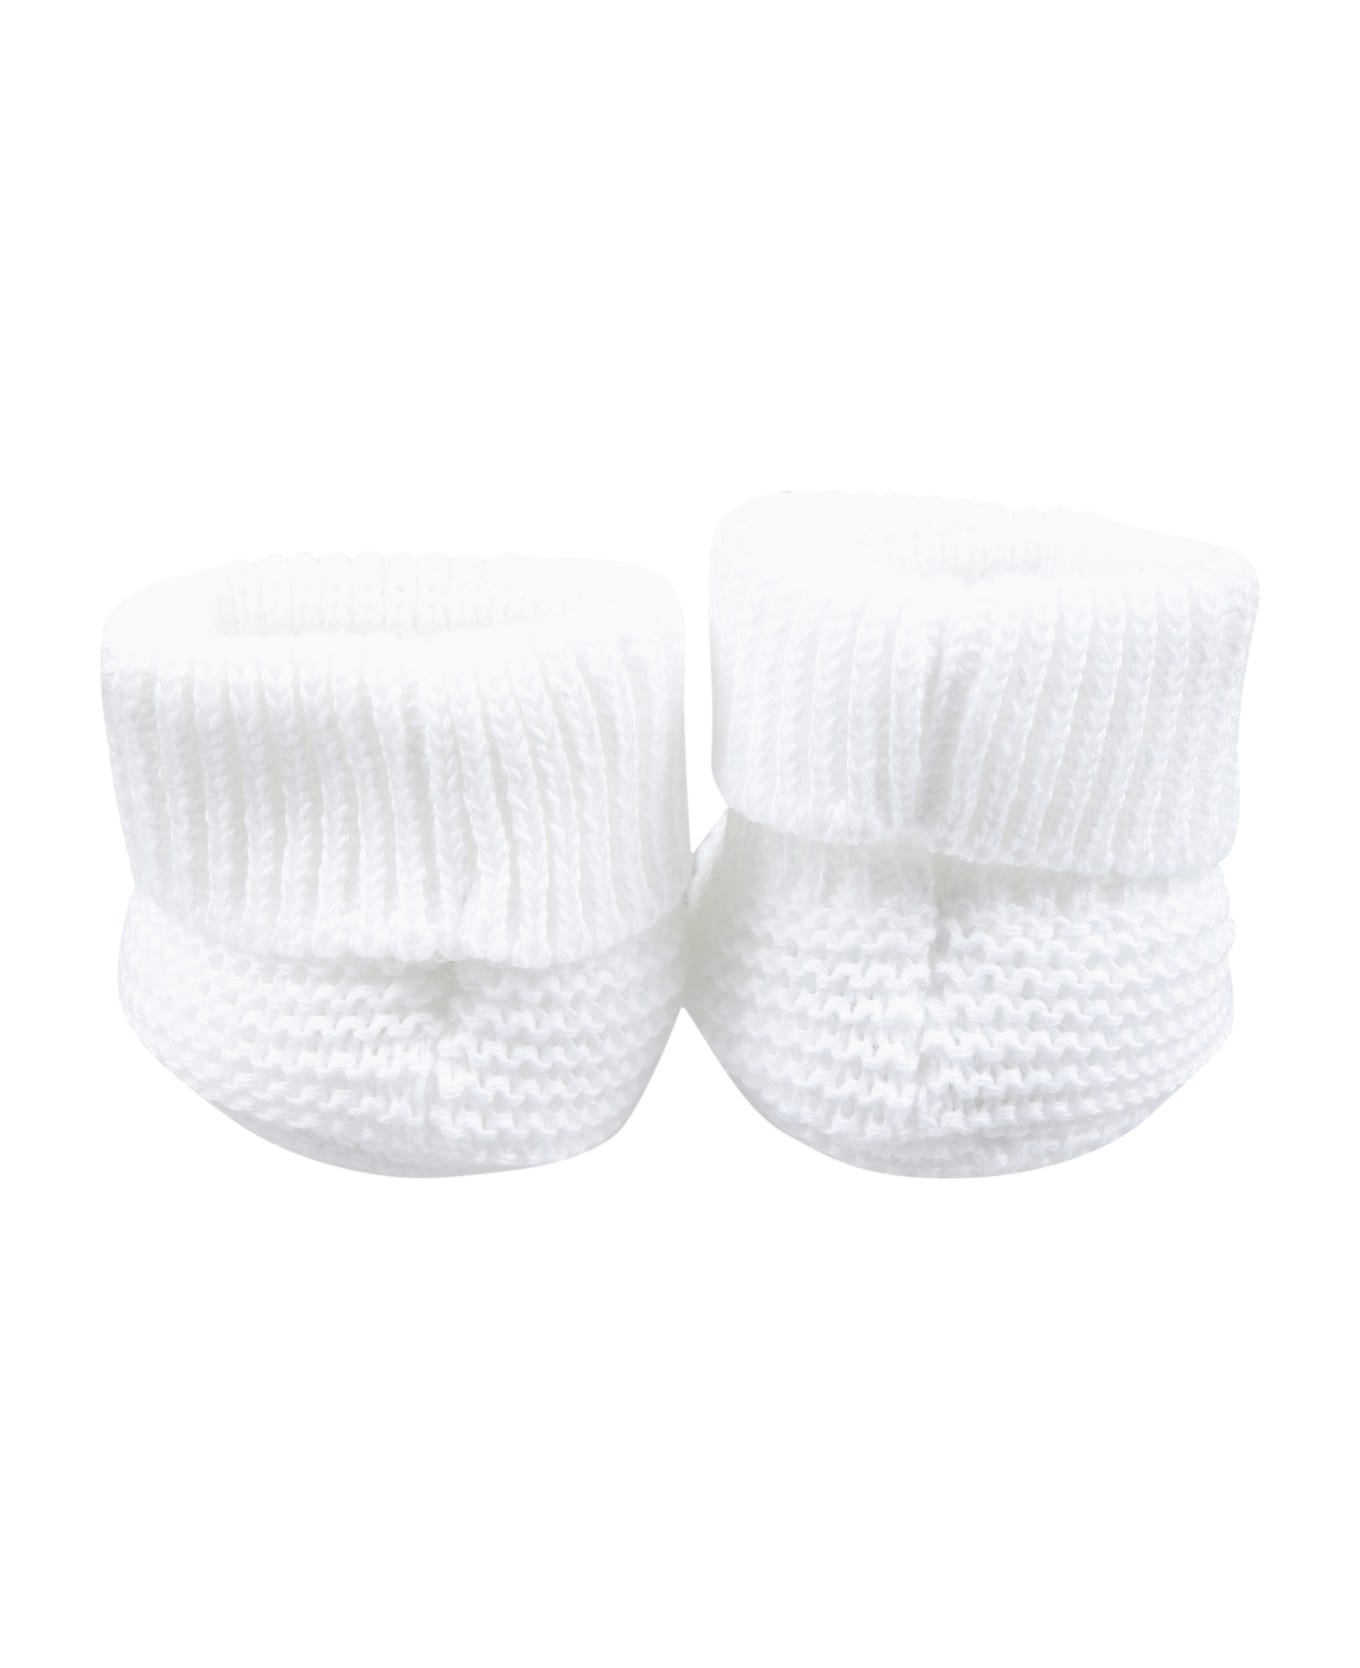 Little Bear White Bootees For Baby Kids - White アクセサリー＆ギフト